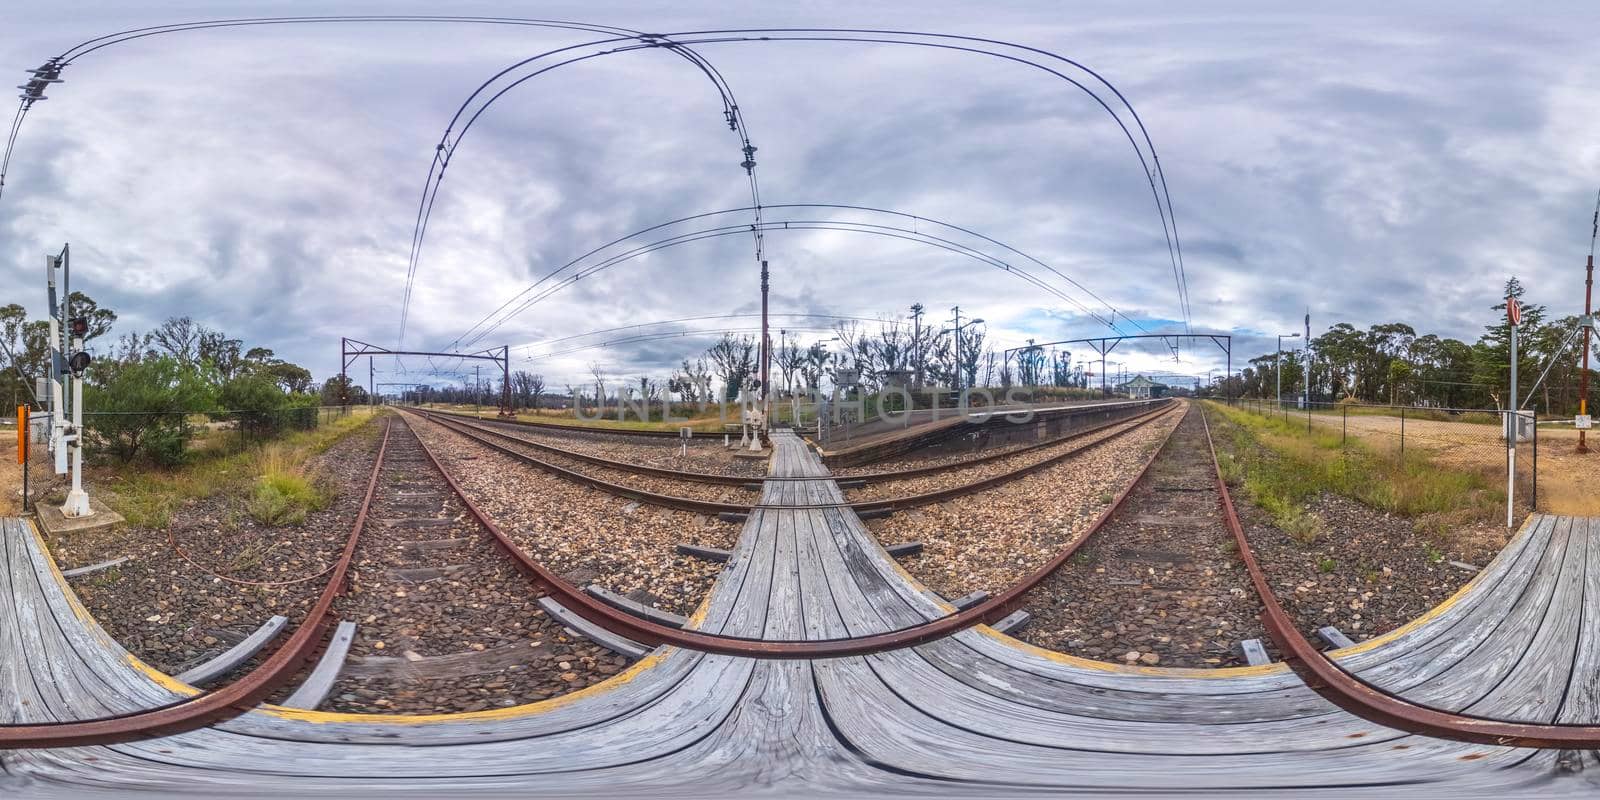 Spherical 360 panorama photograph of the Bell Railway Station in The Blue Mountains in regional New South Wales in Australia